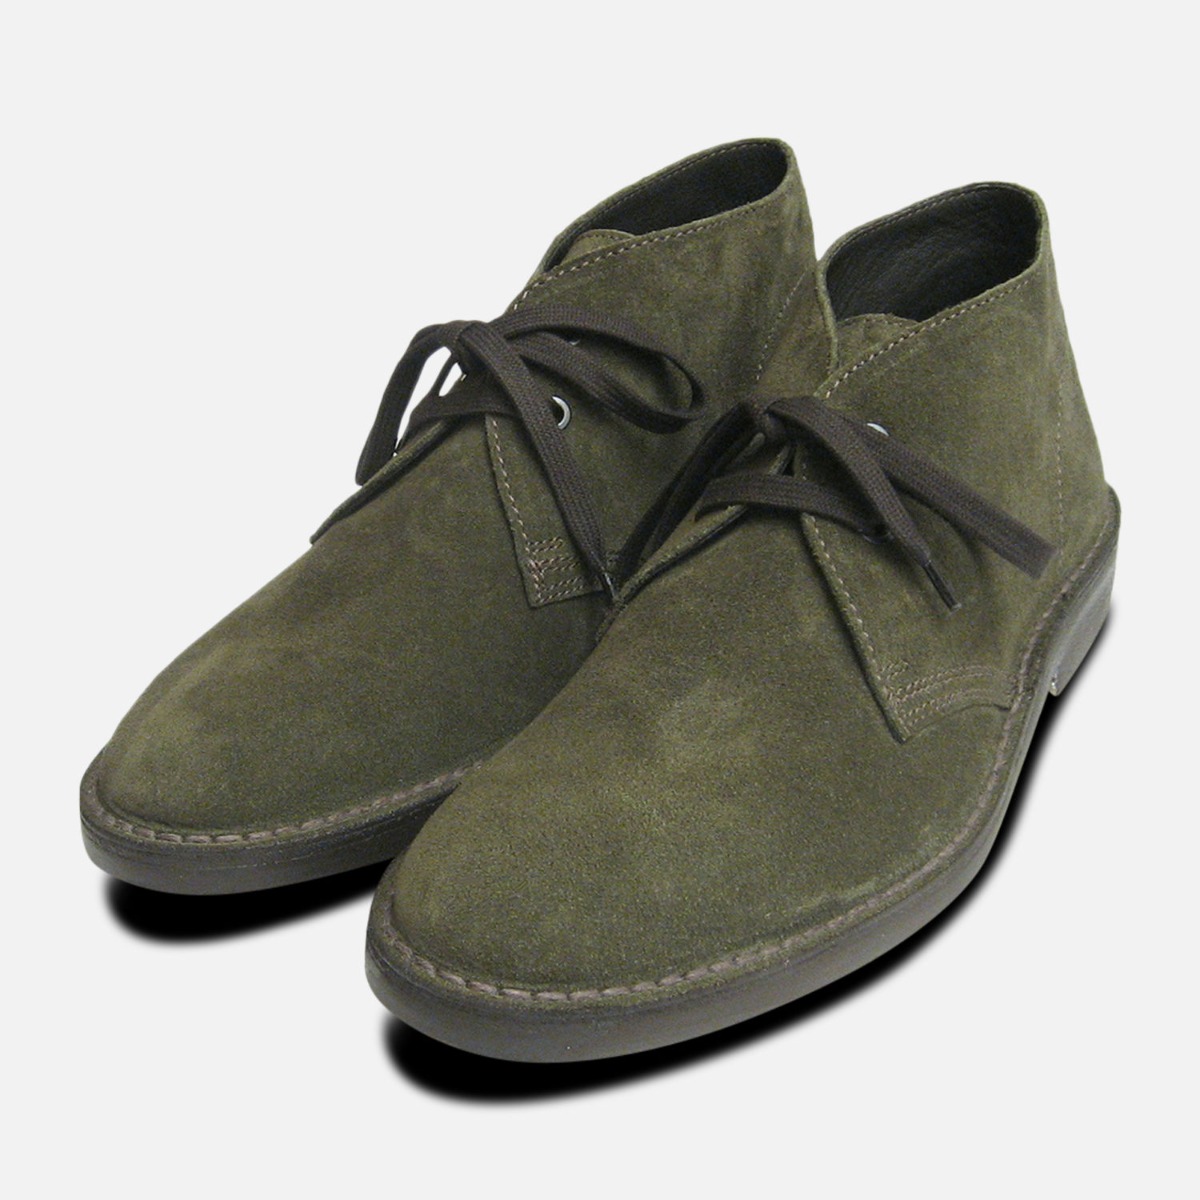 forest green suede shoes